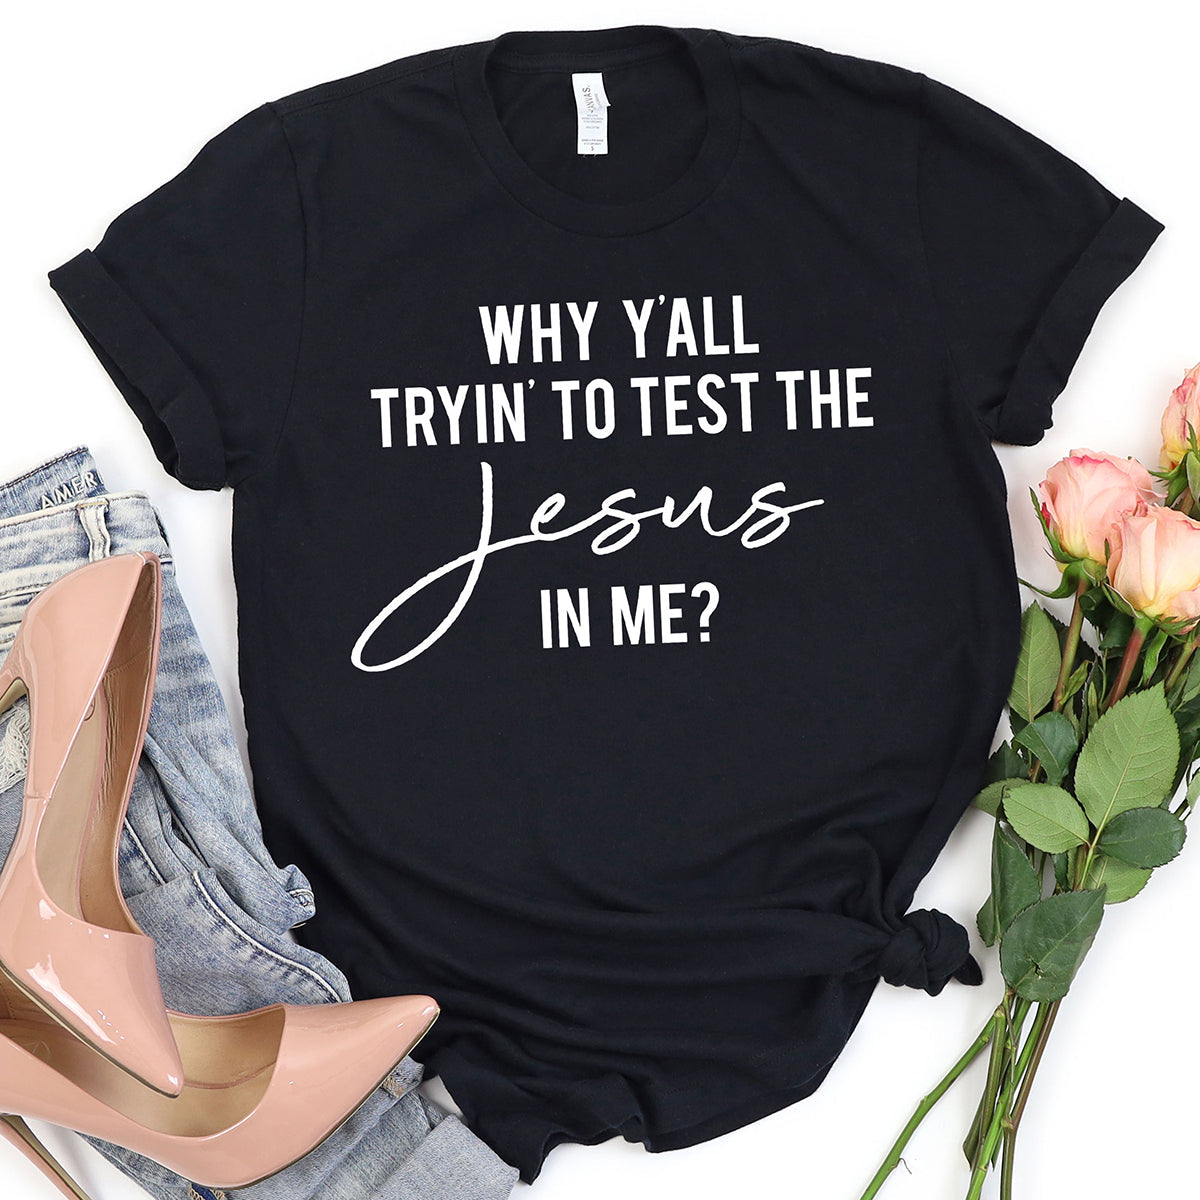 Test The Jesus In Me T-shirt